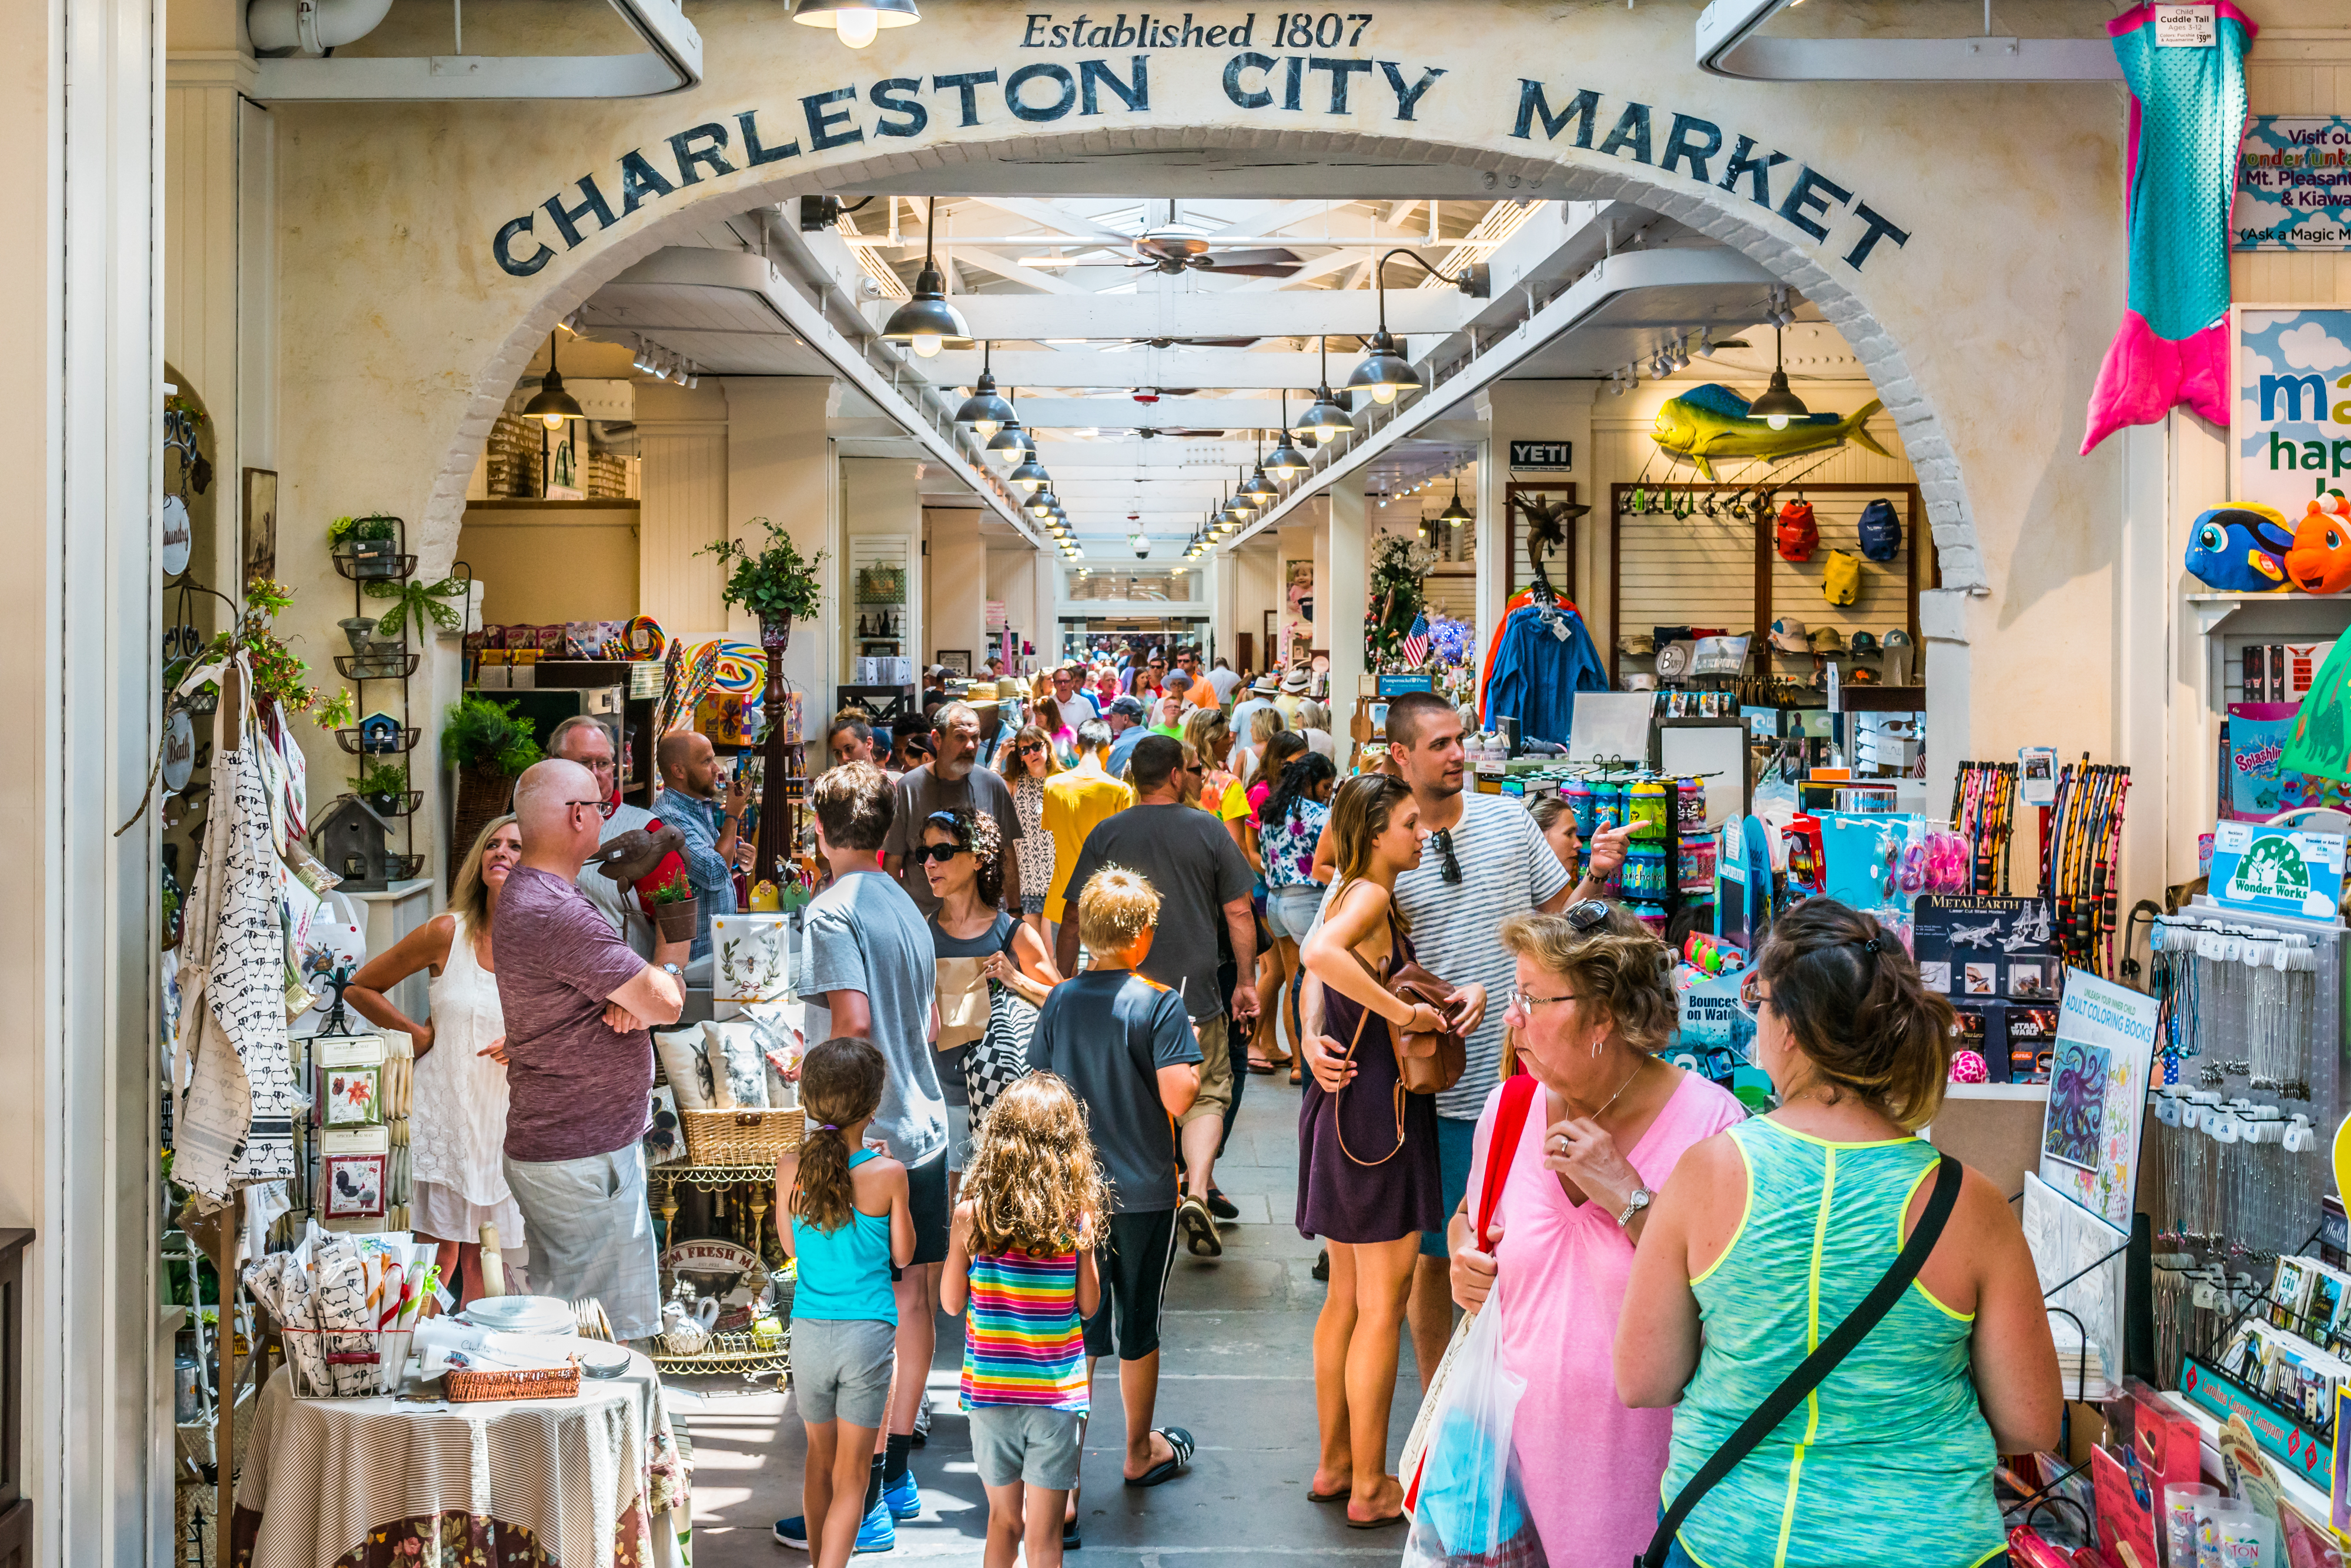 Why You Need to Visit the Charleston City Market